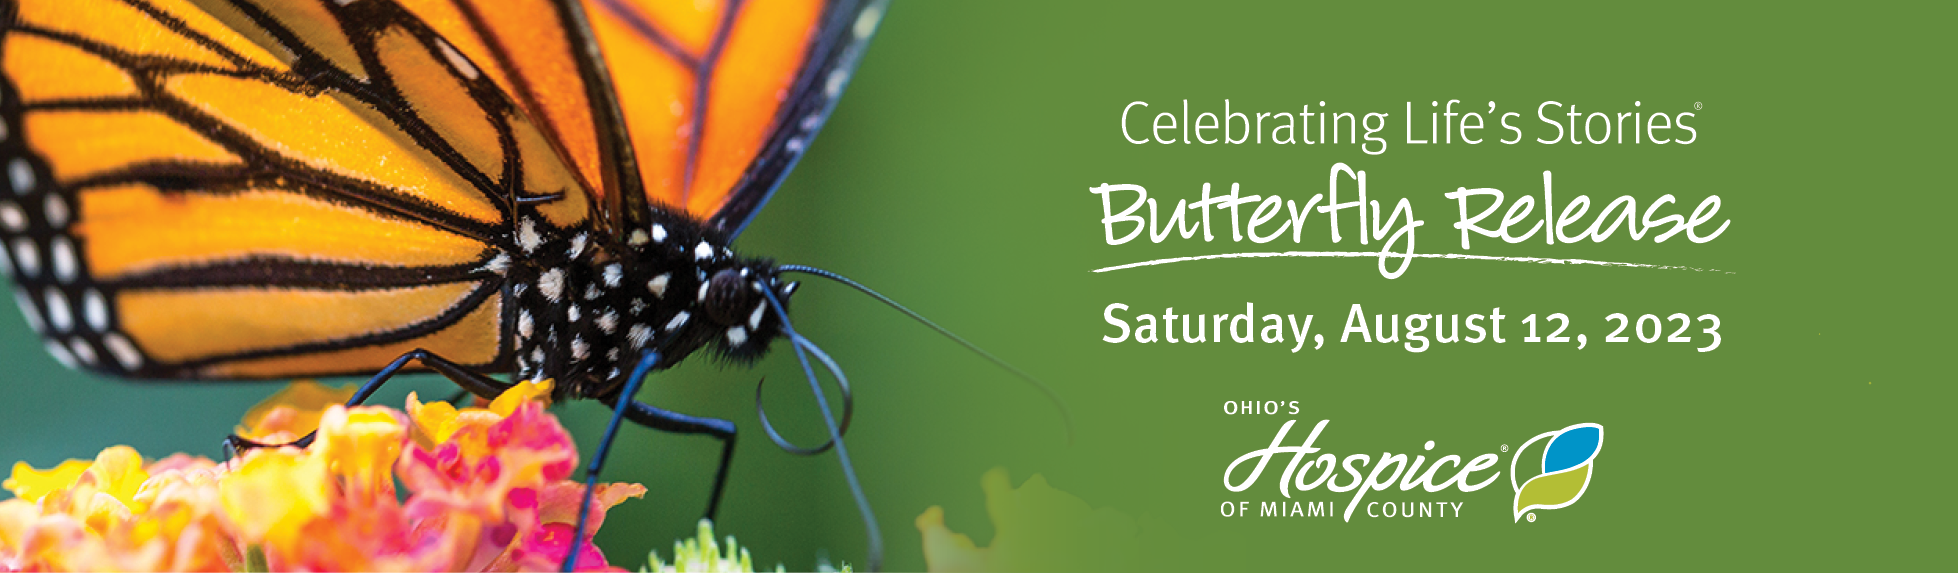 Ohio's Hospice of Miami County Celebrating Life's Stories 2023 Butterfly Release Saturday, August 12, 2023